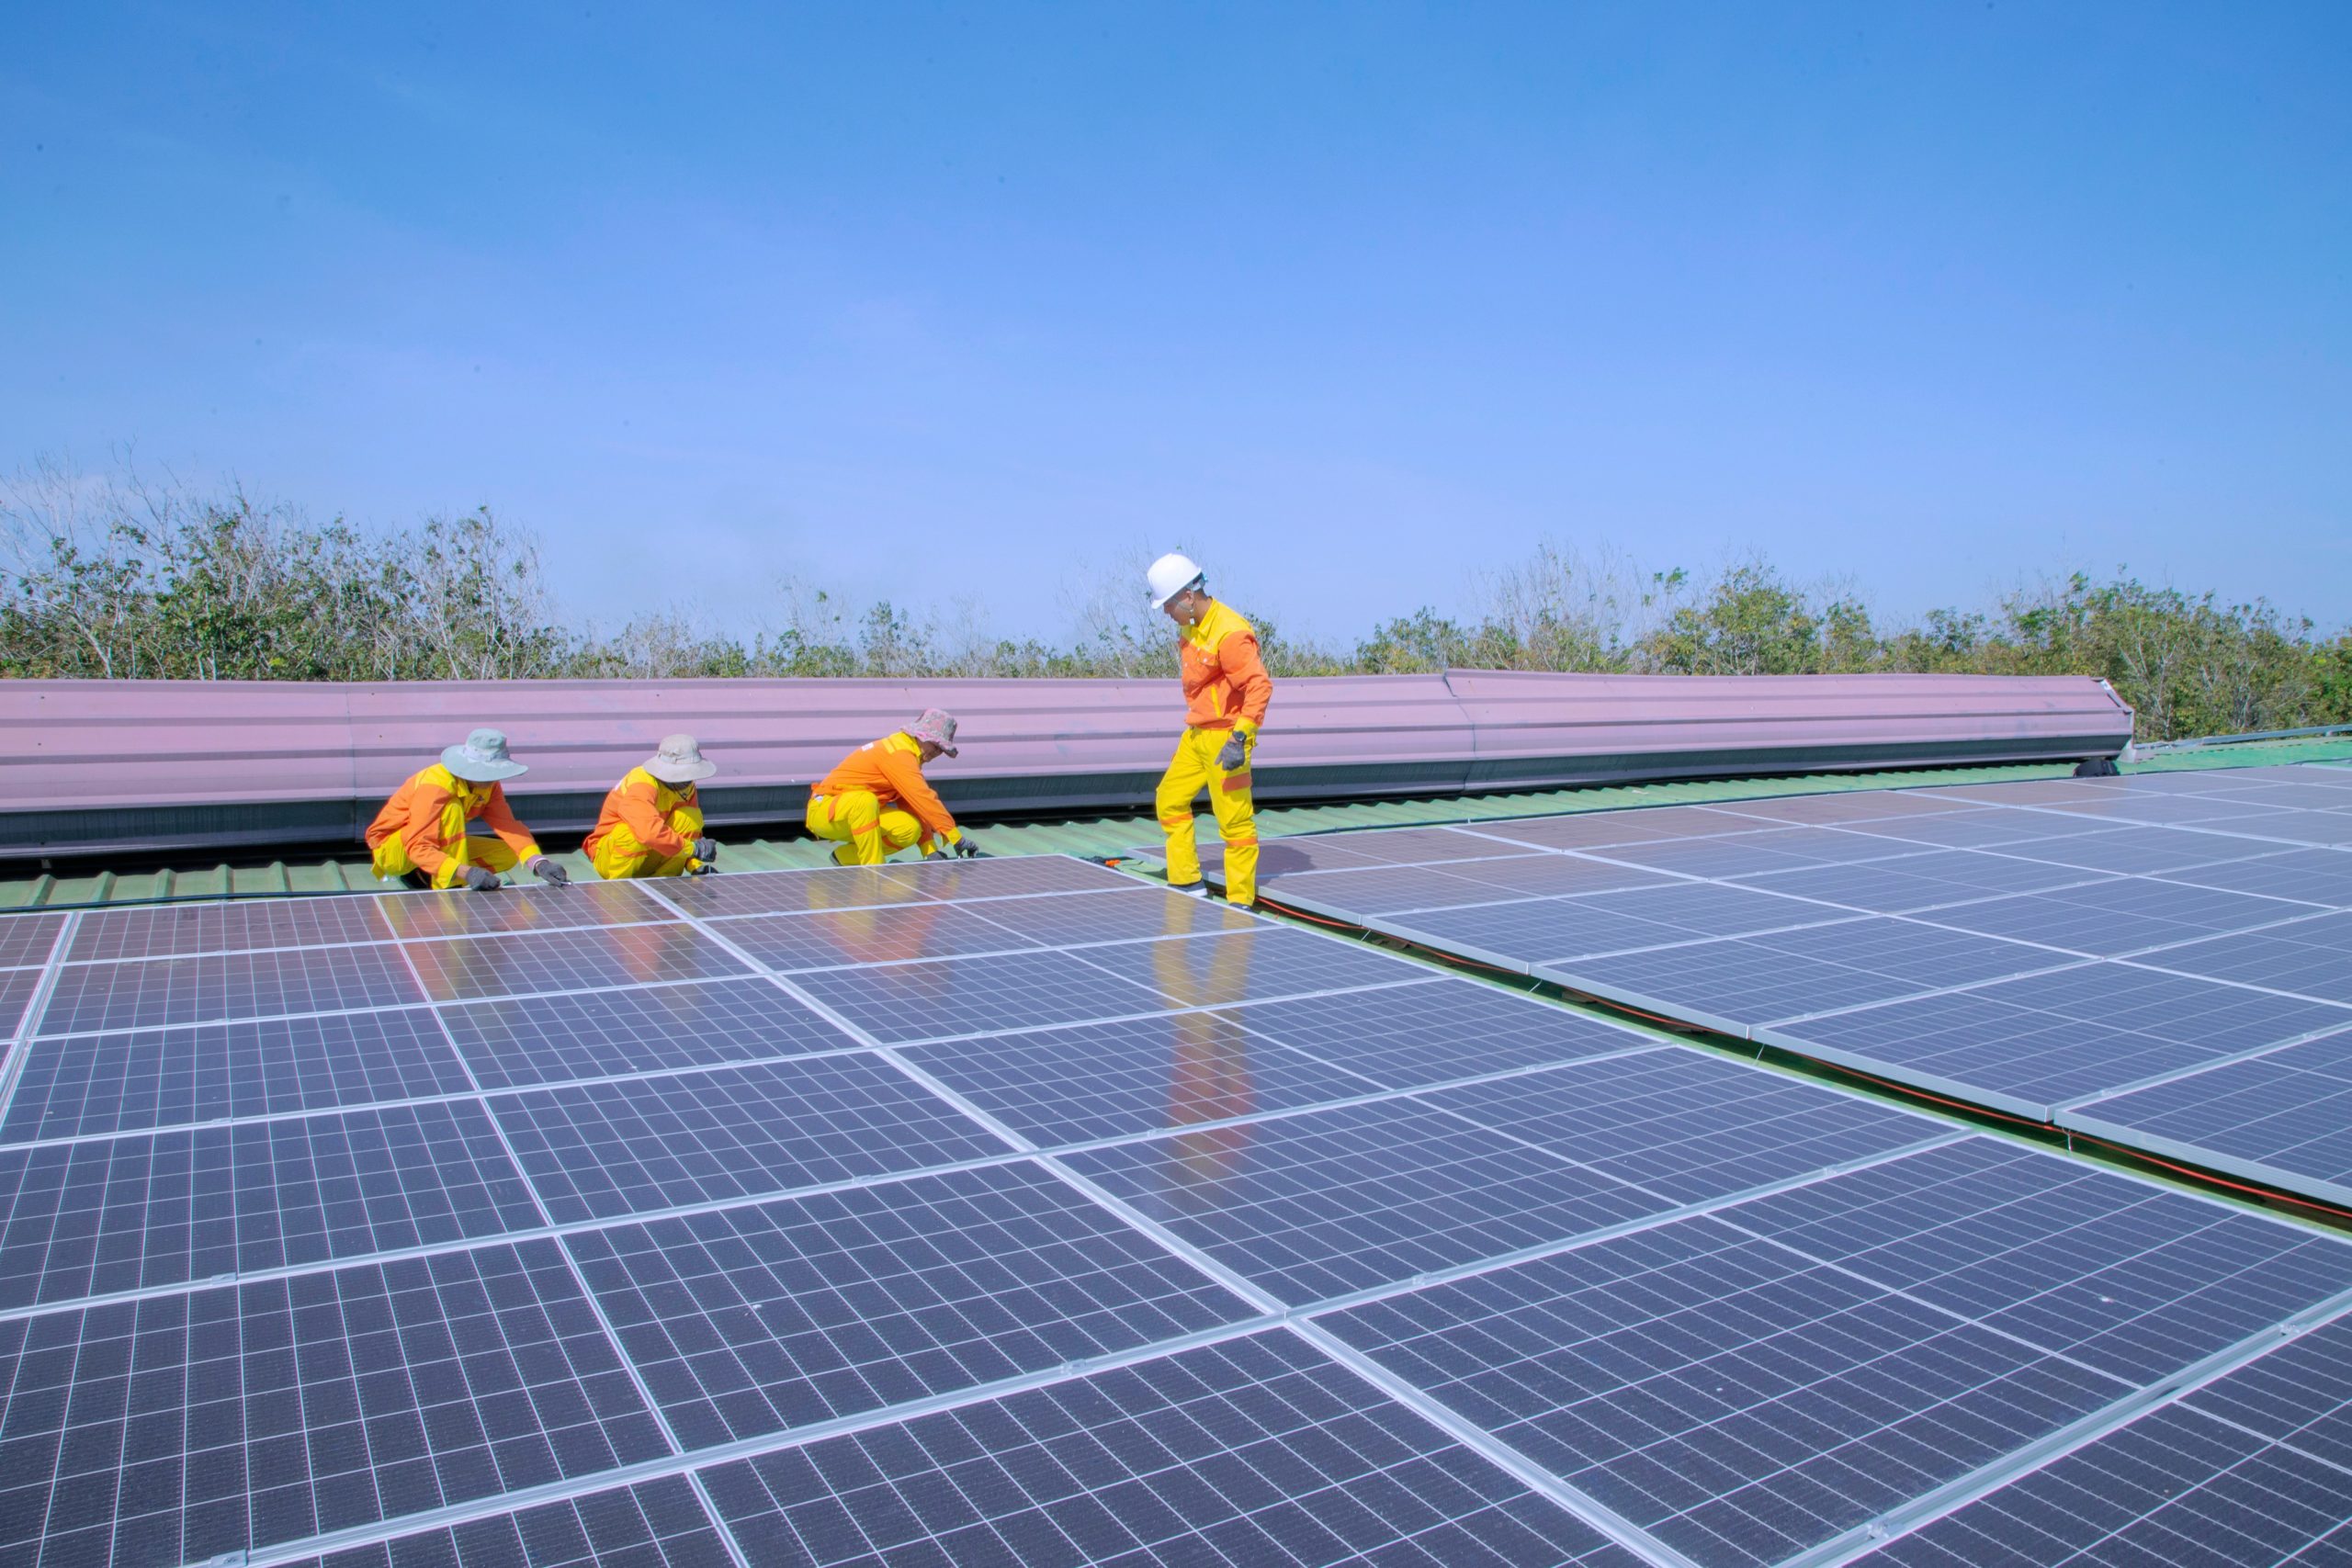 A team of workers is installing a solar panel on a building, harnessing renewable energy.